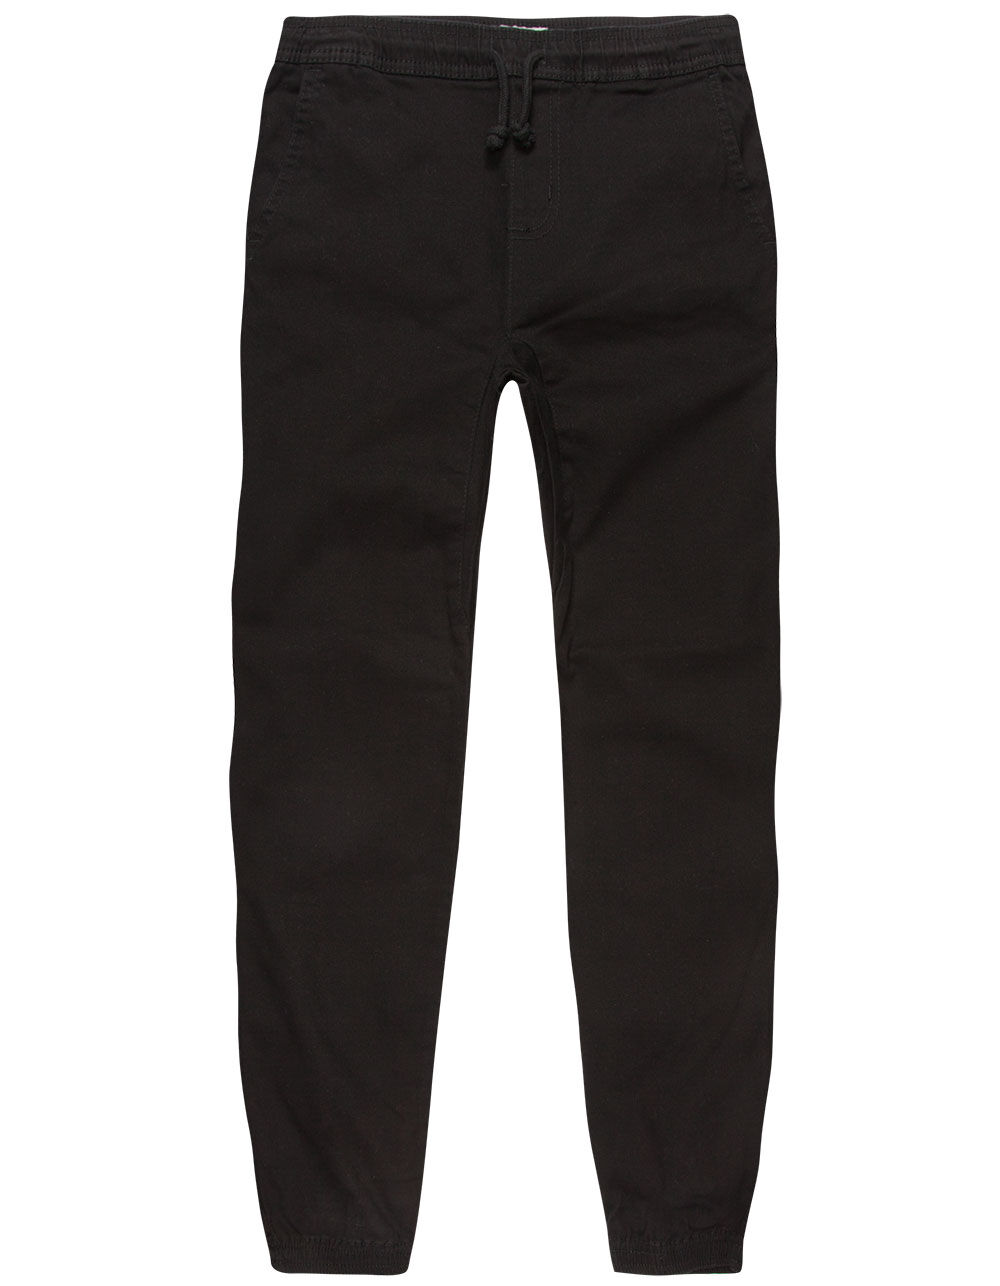 CHARLES AND A HALF Boys Twill Jogger Pants 233950100 | Joggers and ...